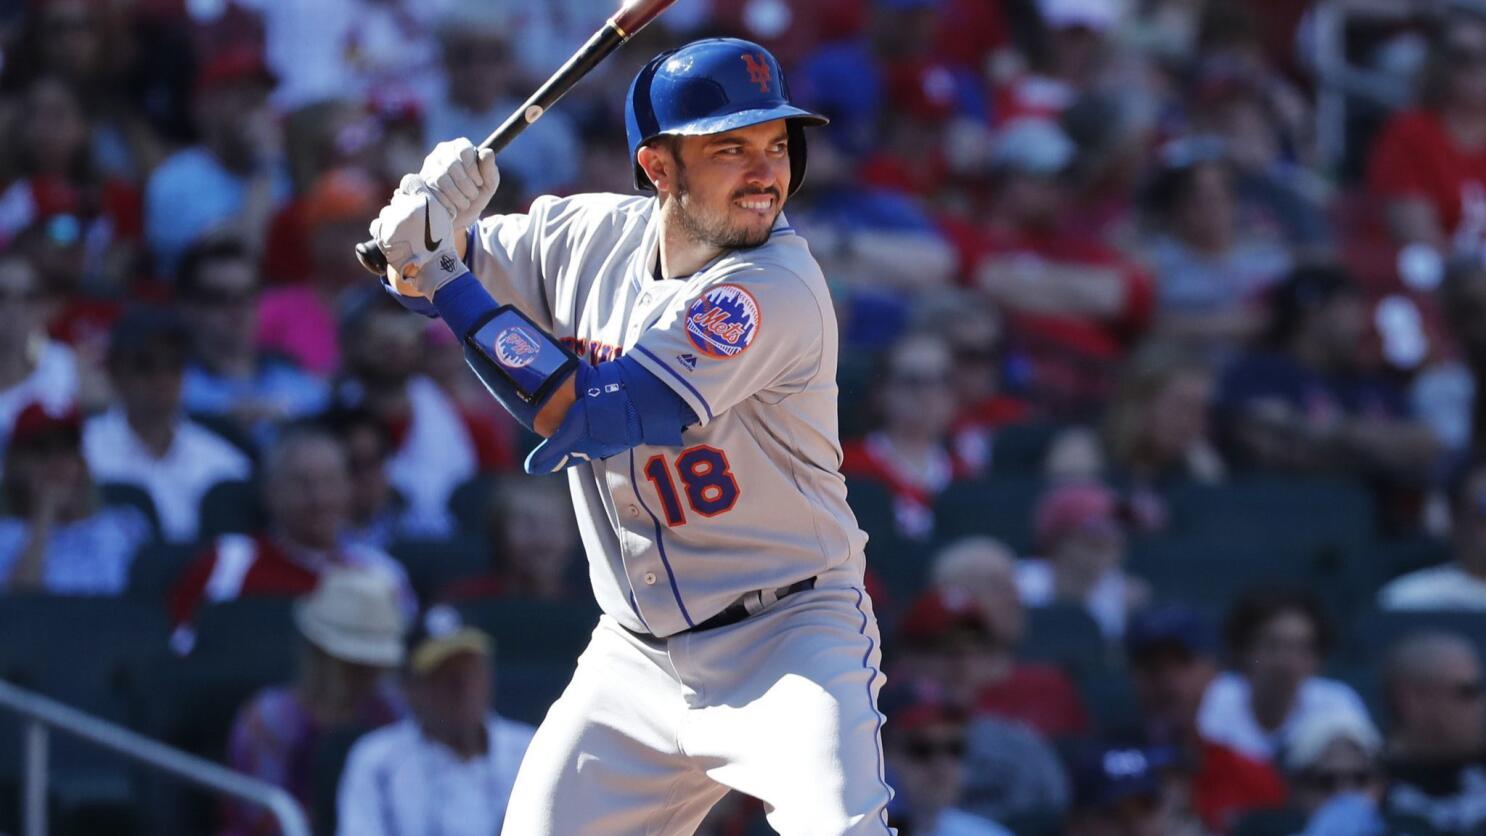 Are Travis d'Arnaud and Chase d'Arnaud related? Looking at the